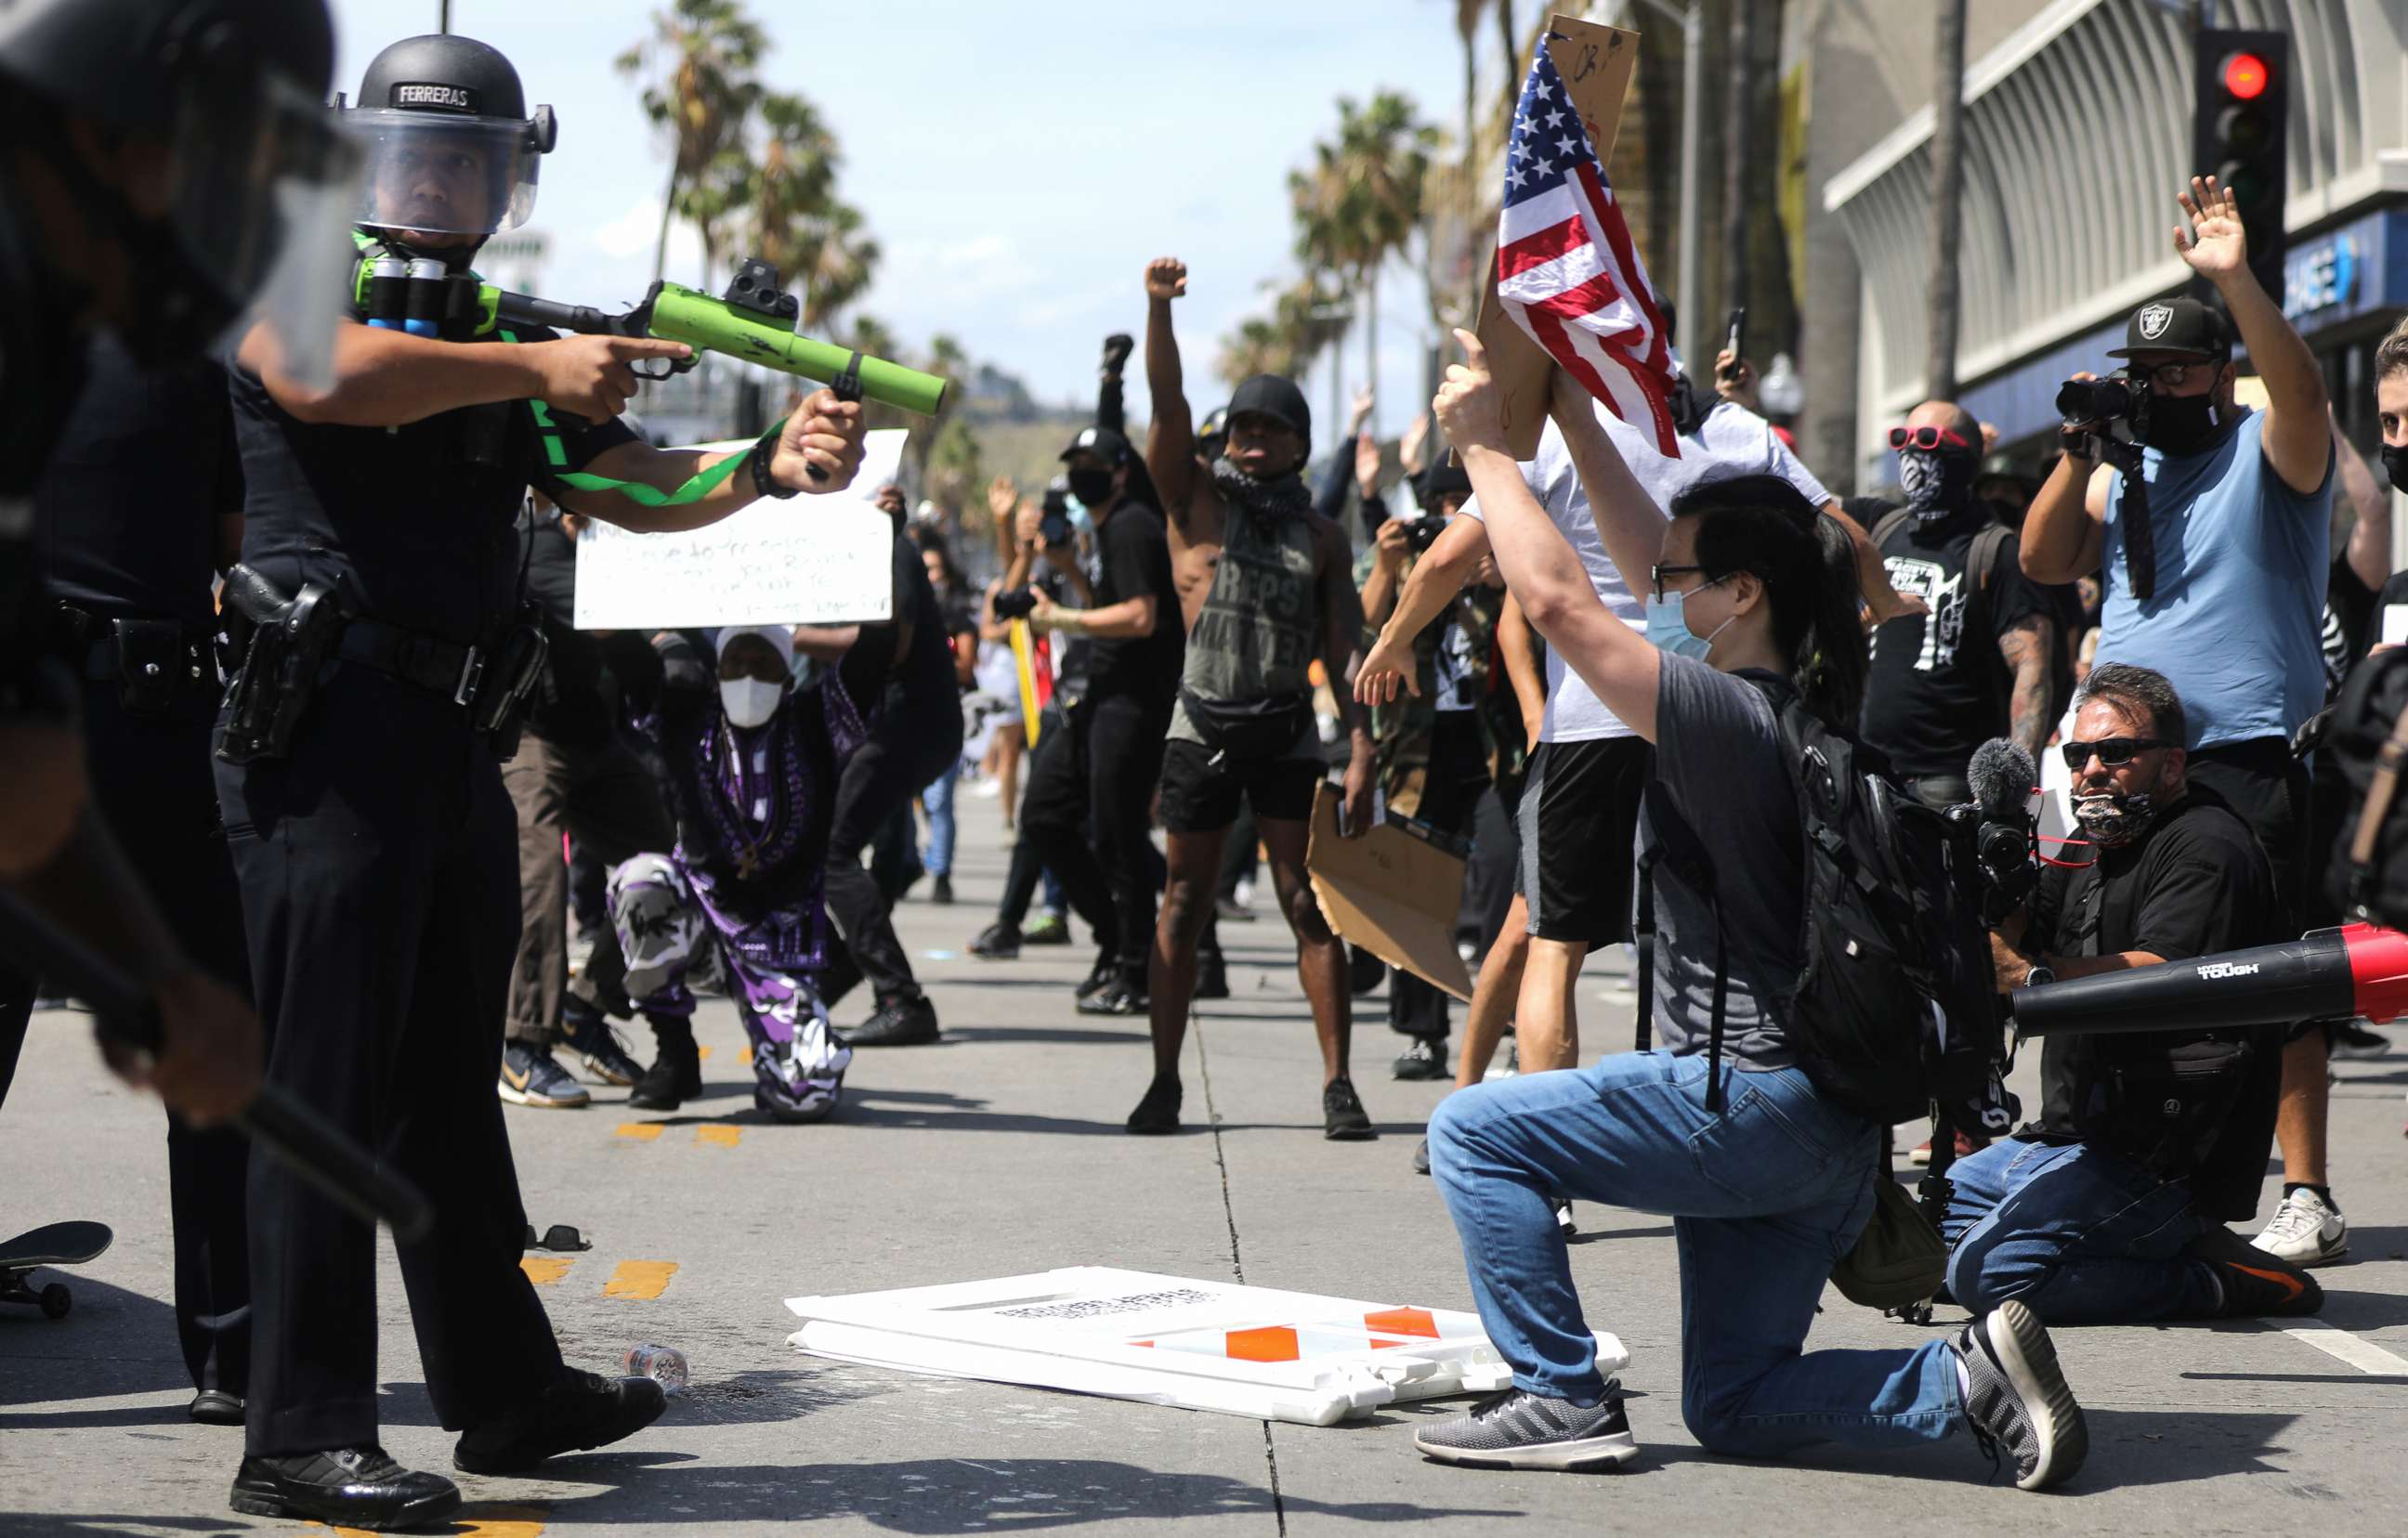 PHOTO: An LAPD officer aims a nonlethal weapon during a confrontation with protestors following the death of George Floyd, May 30, 2020, in Los Angeles.